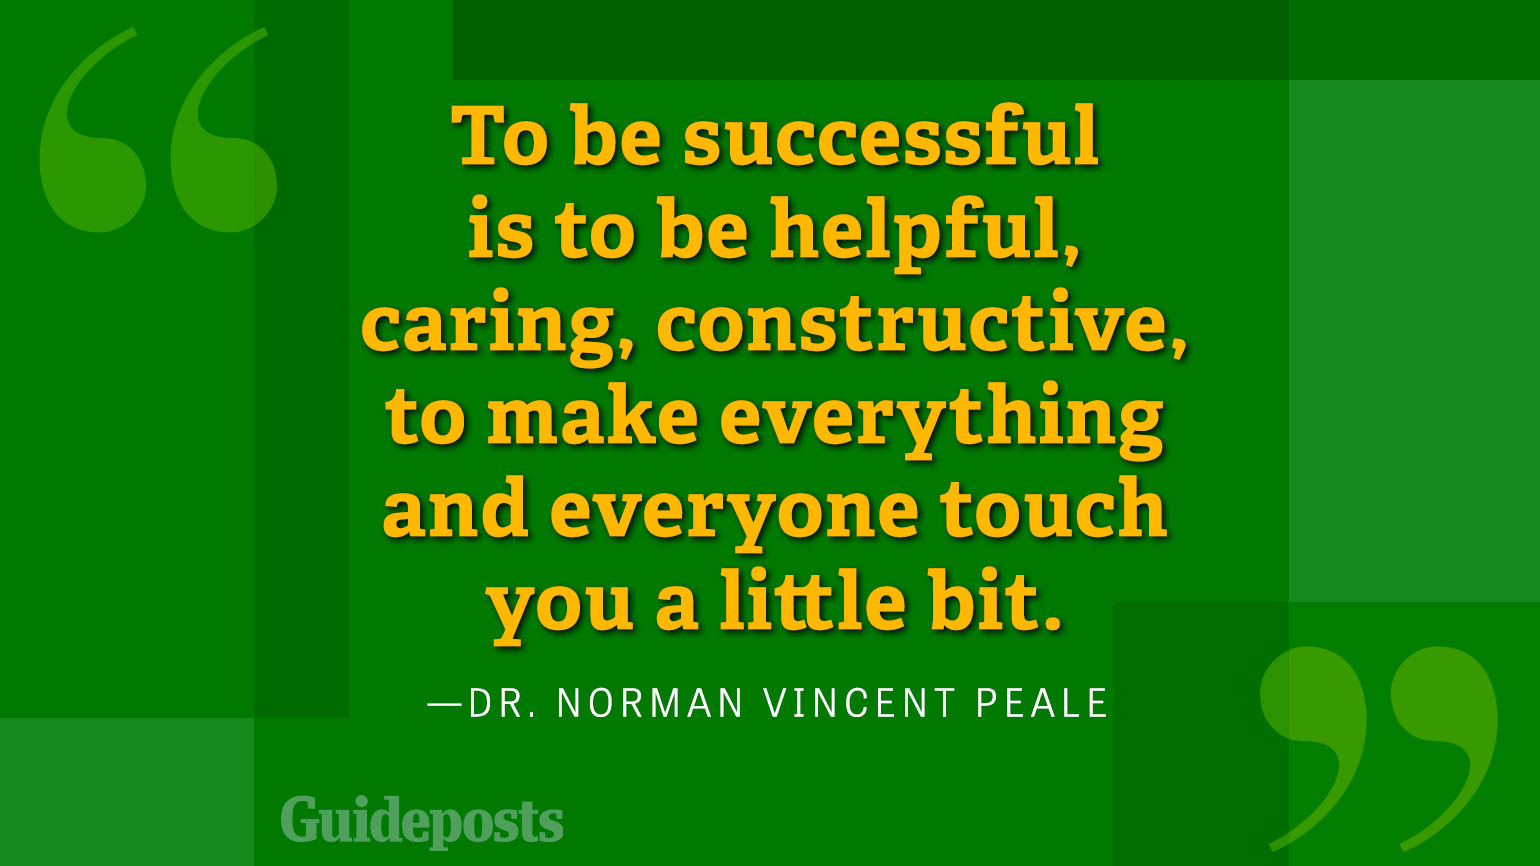 To be successful is to be helpful, caring, constructive, to make everything and everyone touch you a little bit.